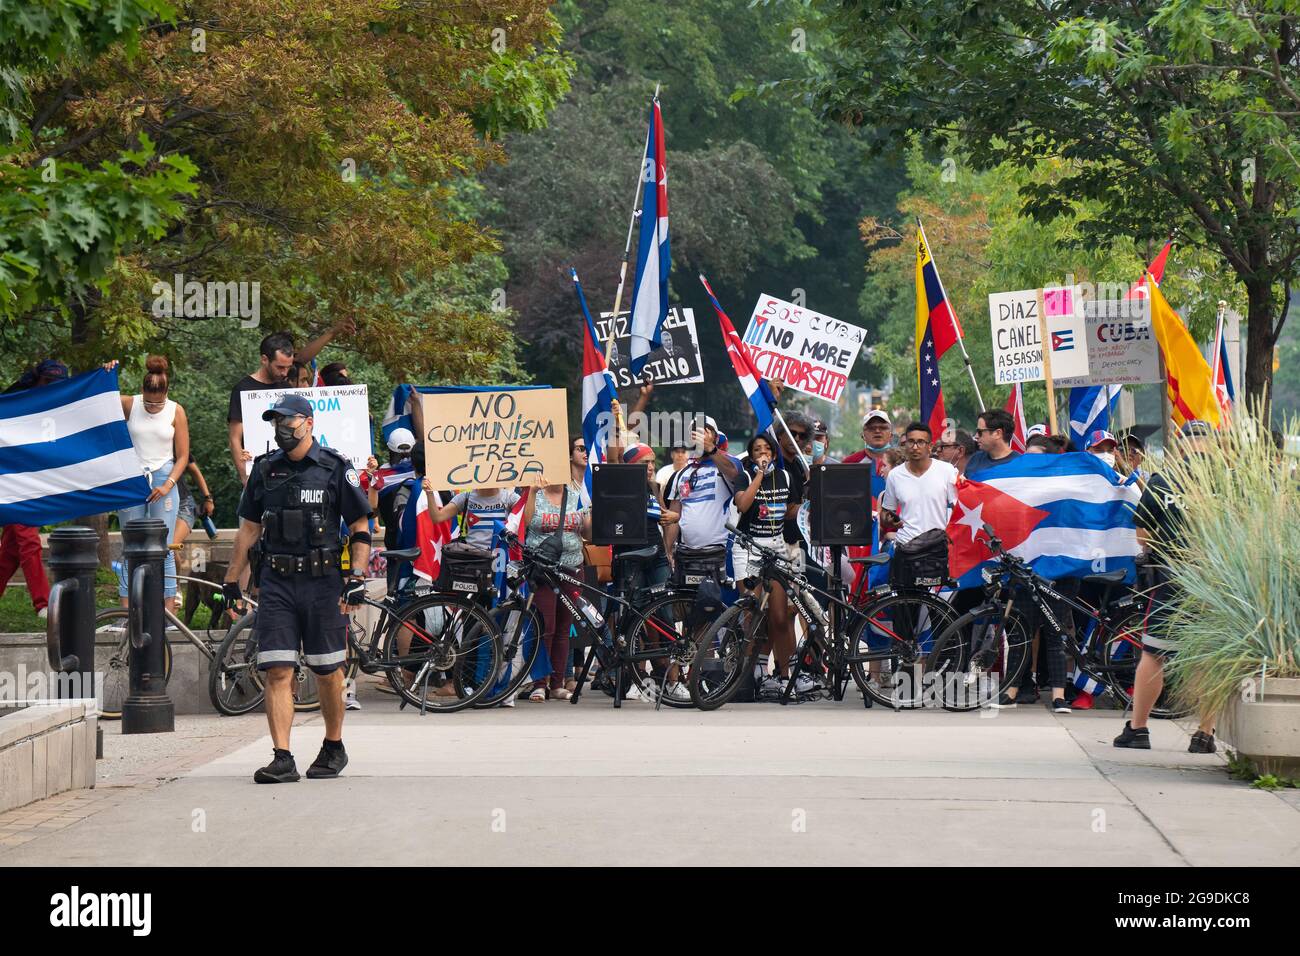 Cuban-Canadians who were calling for a free Cuba stand behind a police blockade while counter-protesting a pro-communism event in Toronto, Canada. Stock Photo